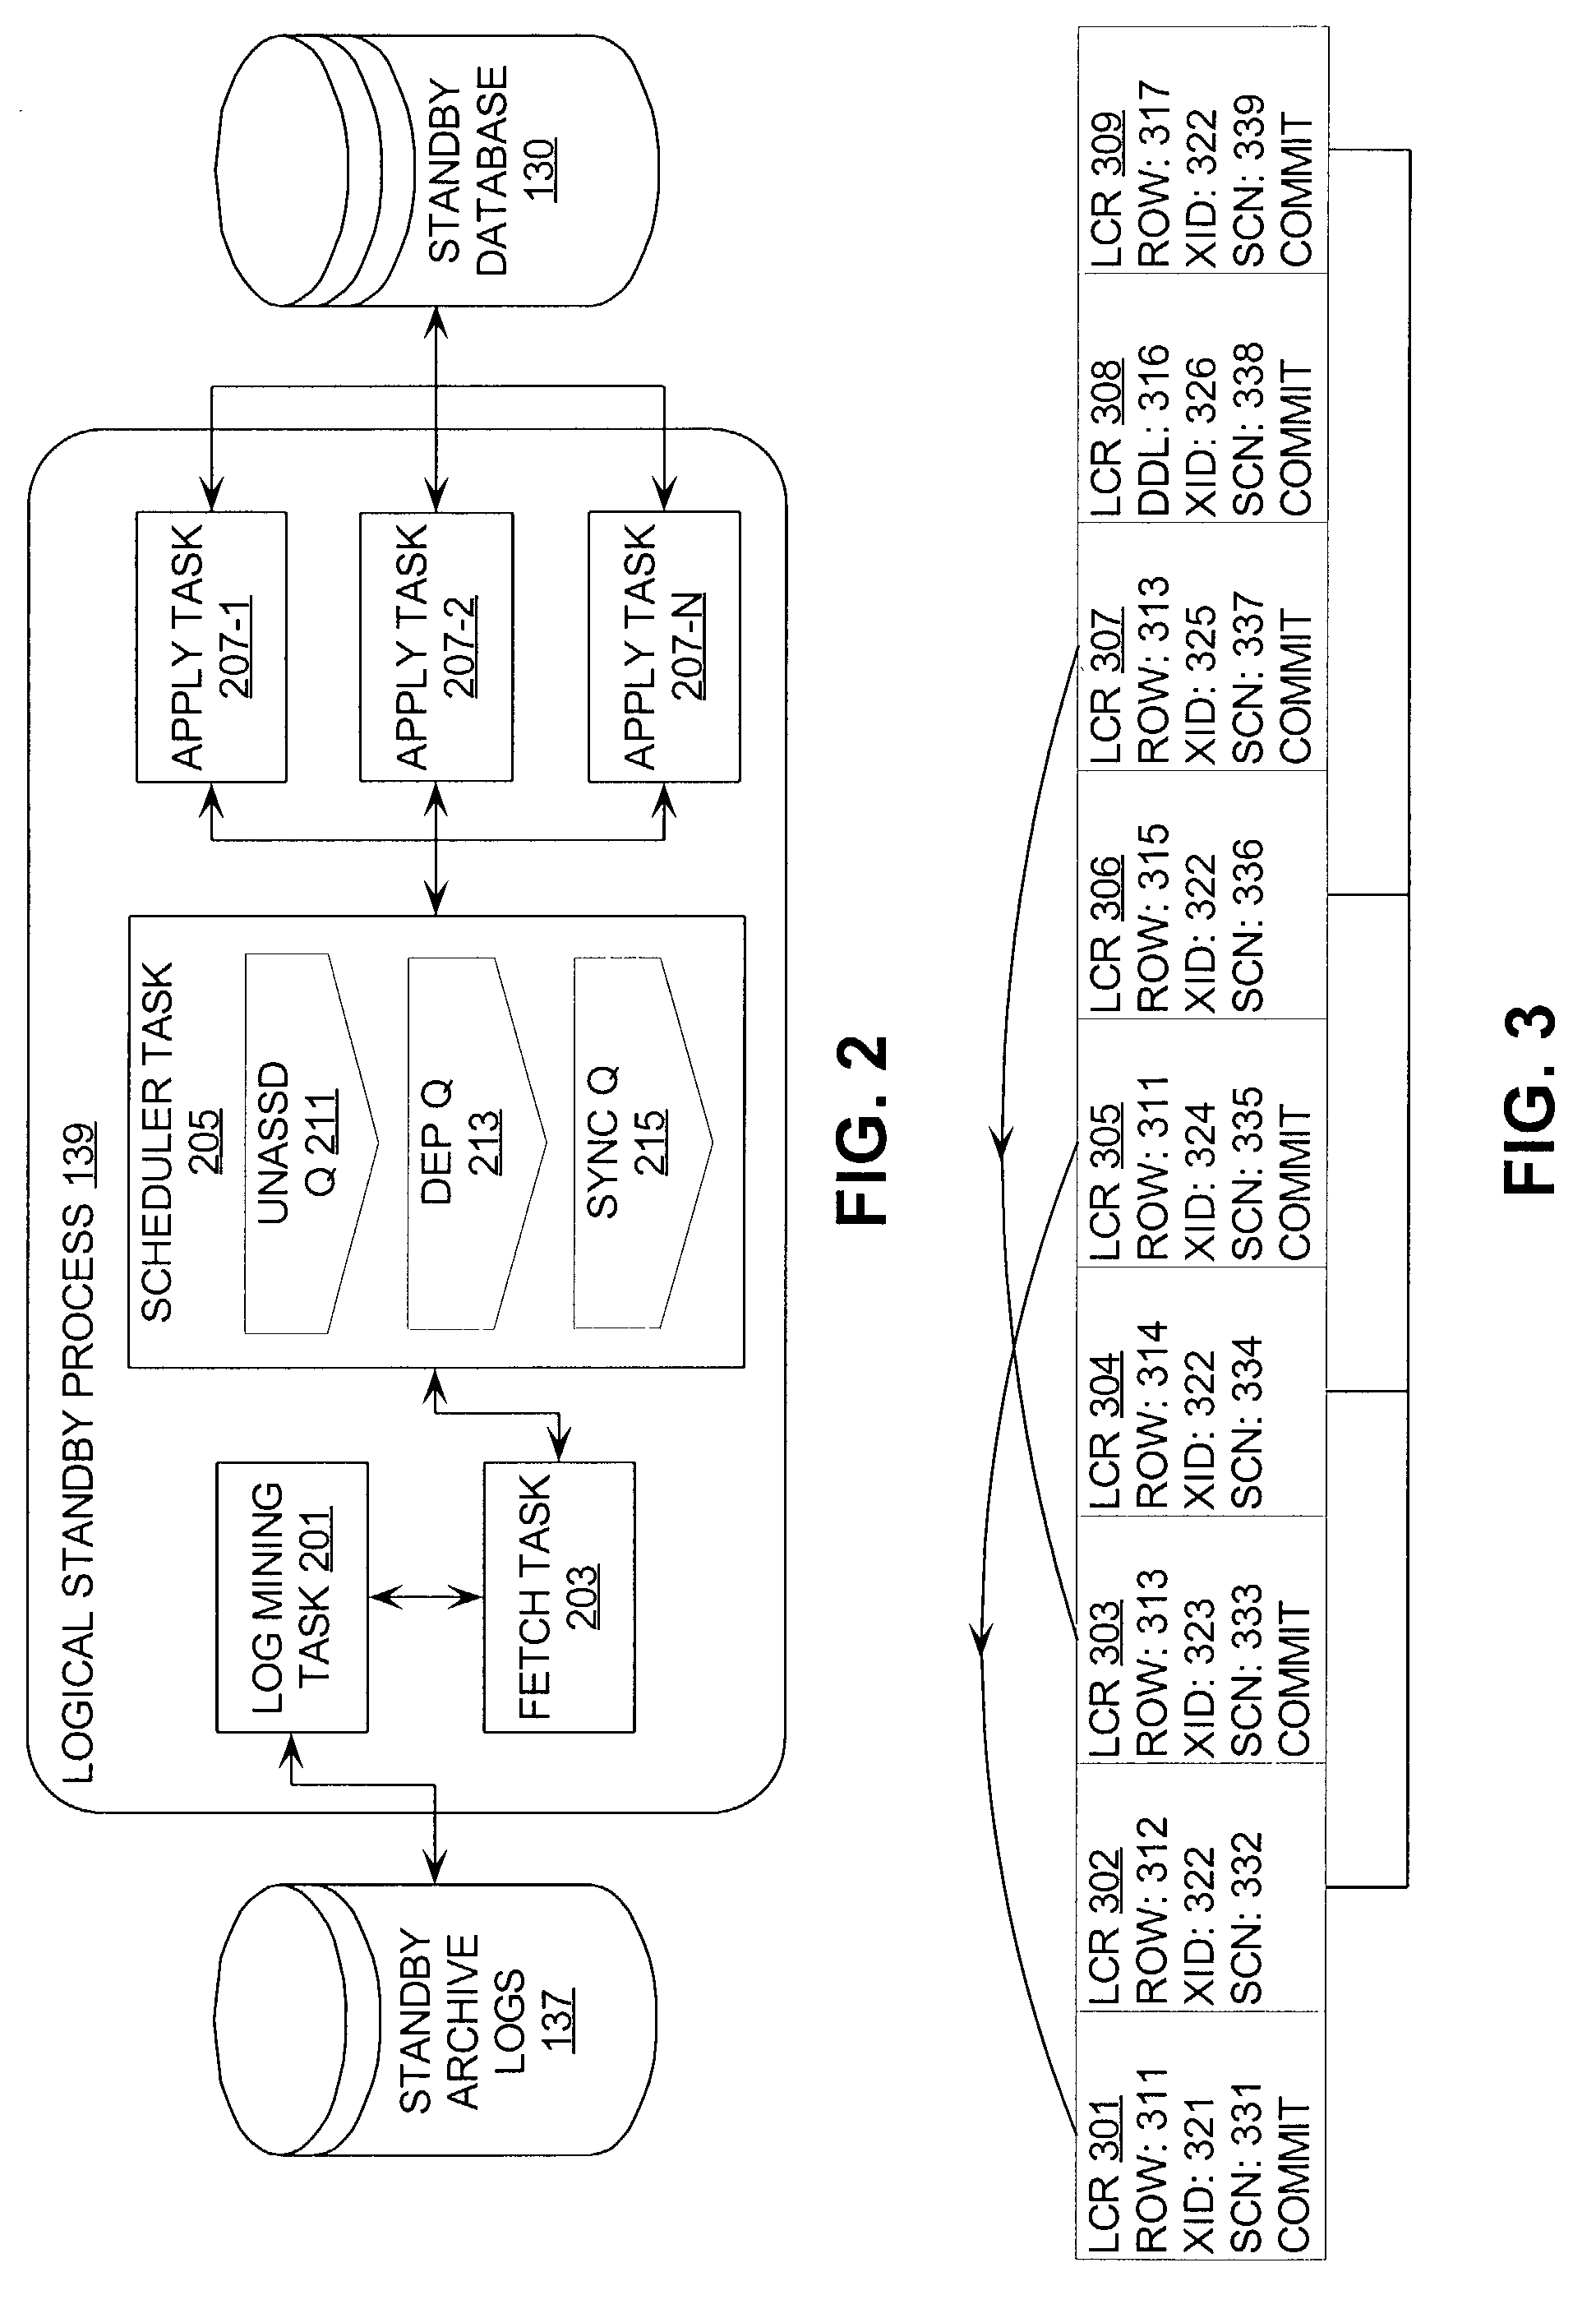 Method of applying changes to a standby database system